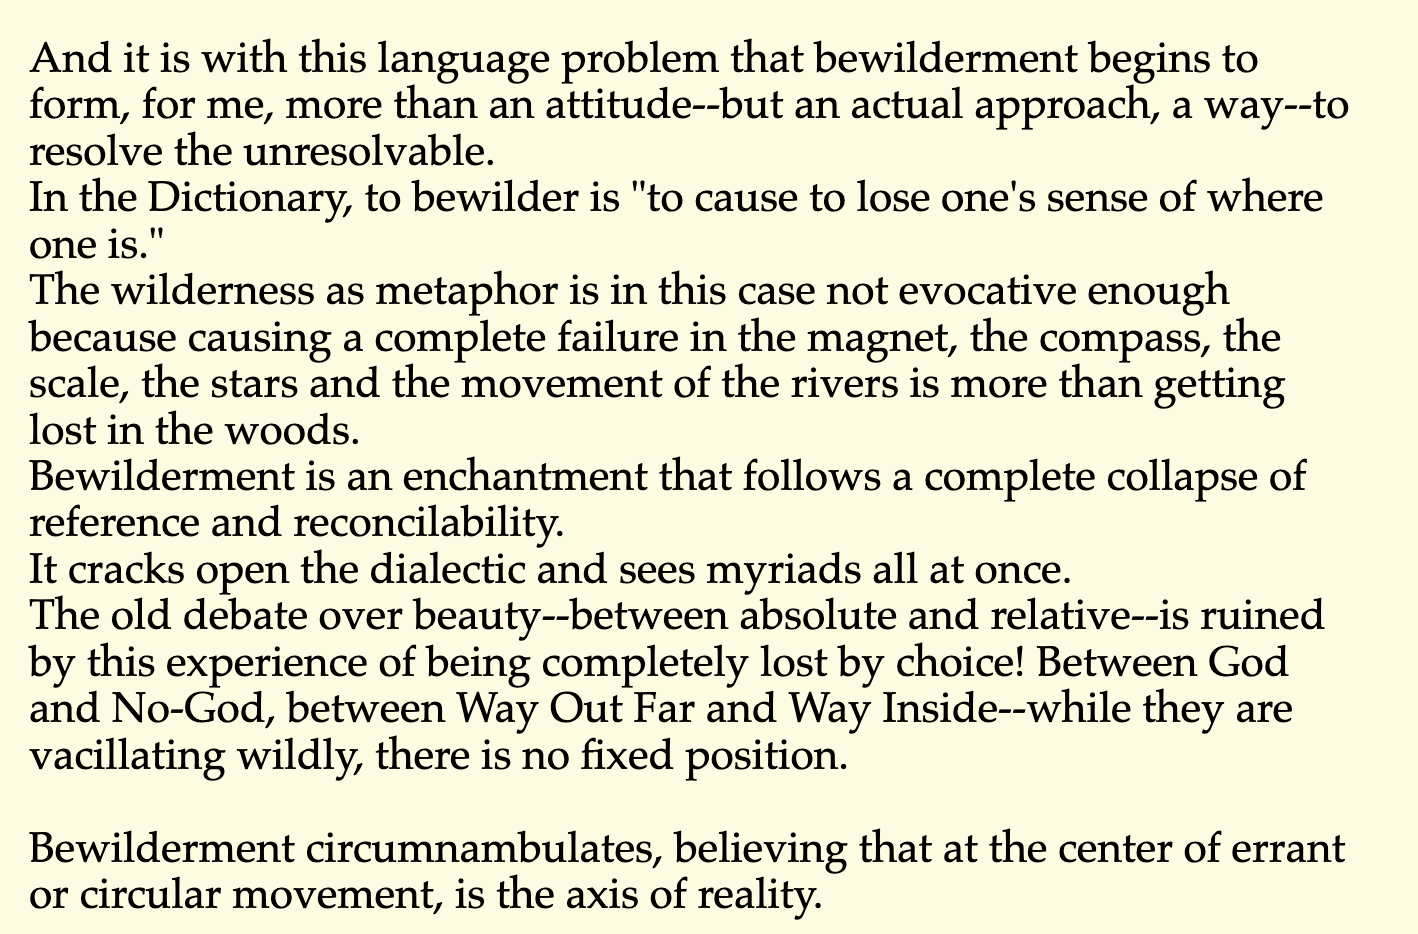 And it is with this language problem that bewilderment begins to form, for me, more than an attitude--but an actual approach, a way--to resolve the unresolvable. In the Dictionary, to bewilder is "to cause to lose one's sense of where one is." The wilderness as metaphor is in this case not evocative enough because causing a complete failure in the magnet, the compass, the scale, the stars and the movement of the rivers is more than getting lost in the woods. Bewilderment is an enchantment that follows a complete collapse of reference and reconcilability. It cracks open the dialectic and sees myriads all at once. The old debate over beauty--between absolute and relative--is ruined by this experience of being completely lost by choice! Between God and No-God, between Way Out Far and Way Inside--while they are vacillating wildly, there is no fixed position.  Bewilderment circumnambulates, believing that at the center of errant or circular movement, is the axis of reality.